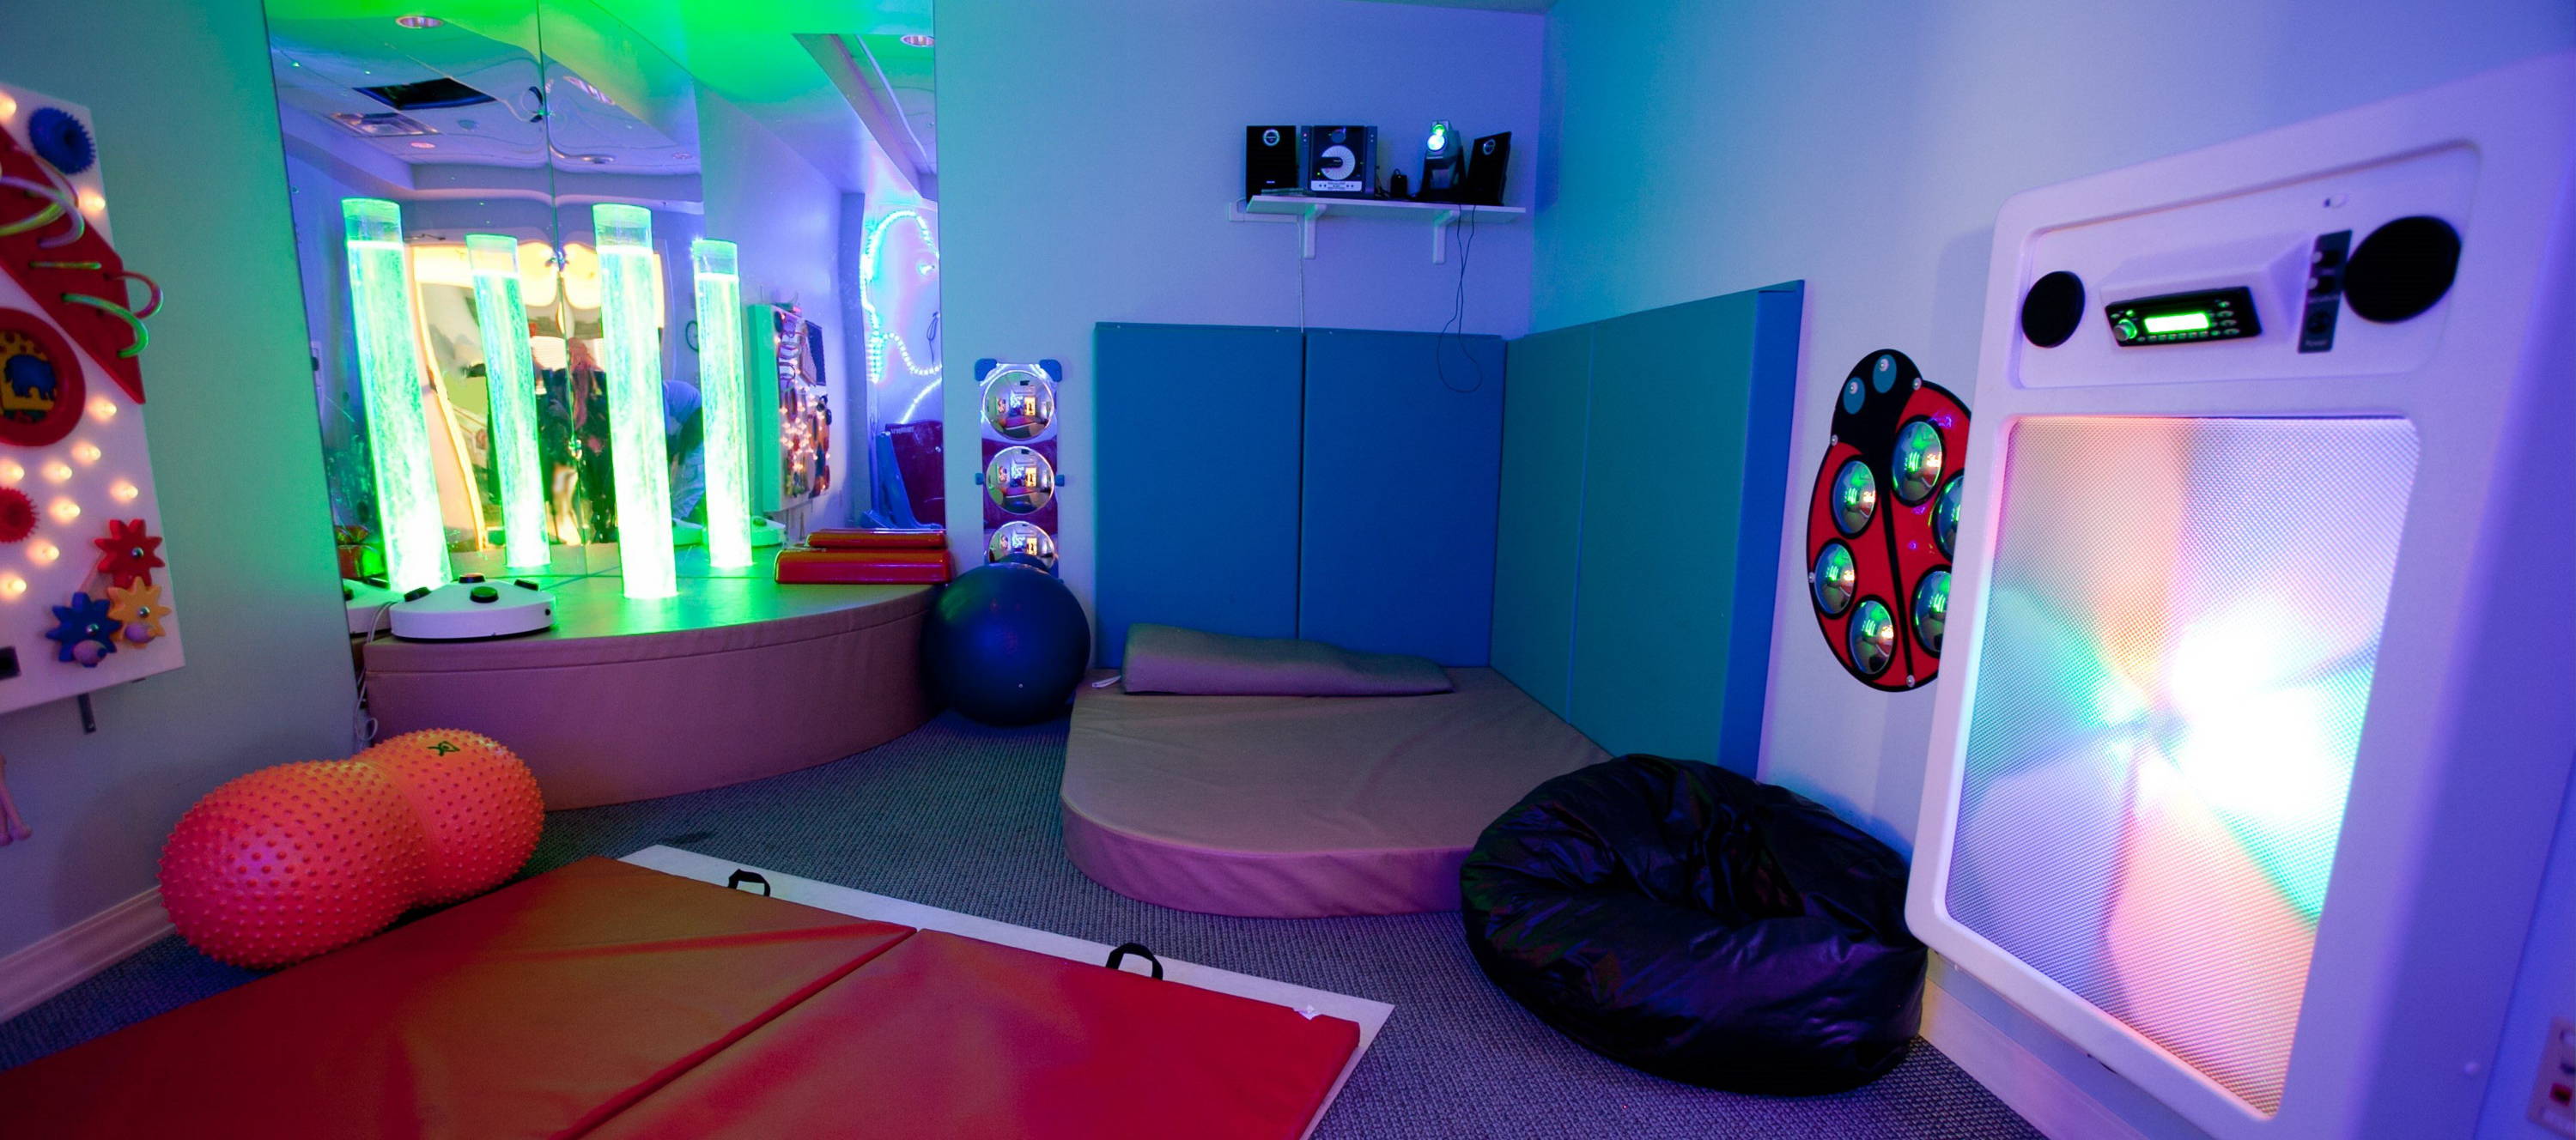 A Sensory Room: The Best Space to Create for Some Amazing Relaxation and  StimulationBlog Hub